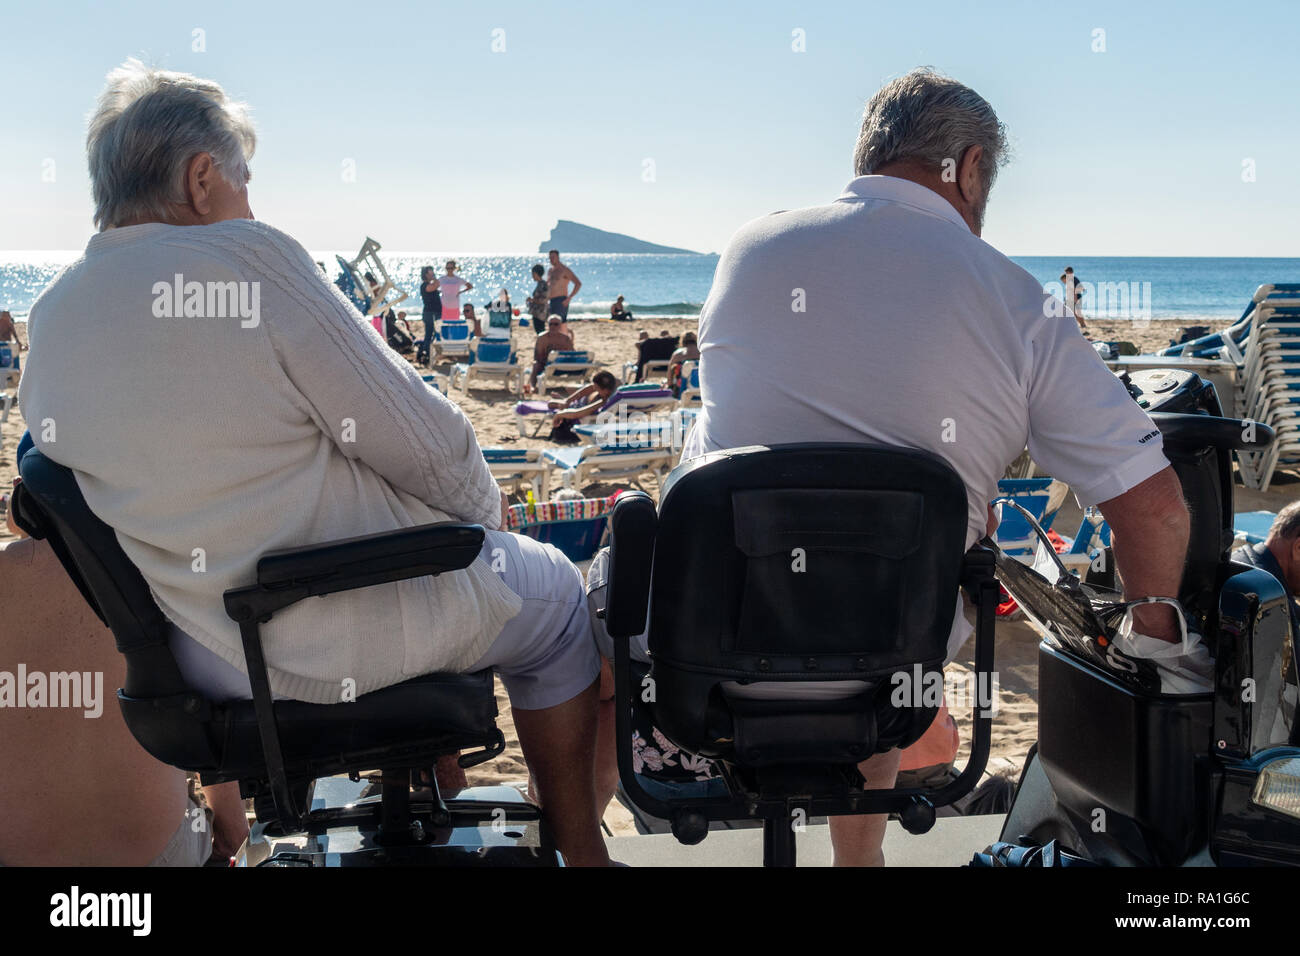 Benidorm, Spain. 30 December 2018. British tourists mix with locals on the beaches and in the bars and restaurants as they escape the cold British weather and head south to Spain. High temperatures meant that the beaches were busy from early morning with families enjoying the calm sea and temps of about 17 Celsius. middle aged couple sitting an a disability scooter on the promenade in this popular Spanish resort. Credit: Mick Flynn/Alamy Live News Stock Photo